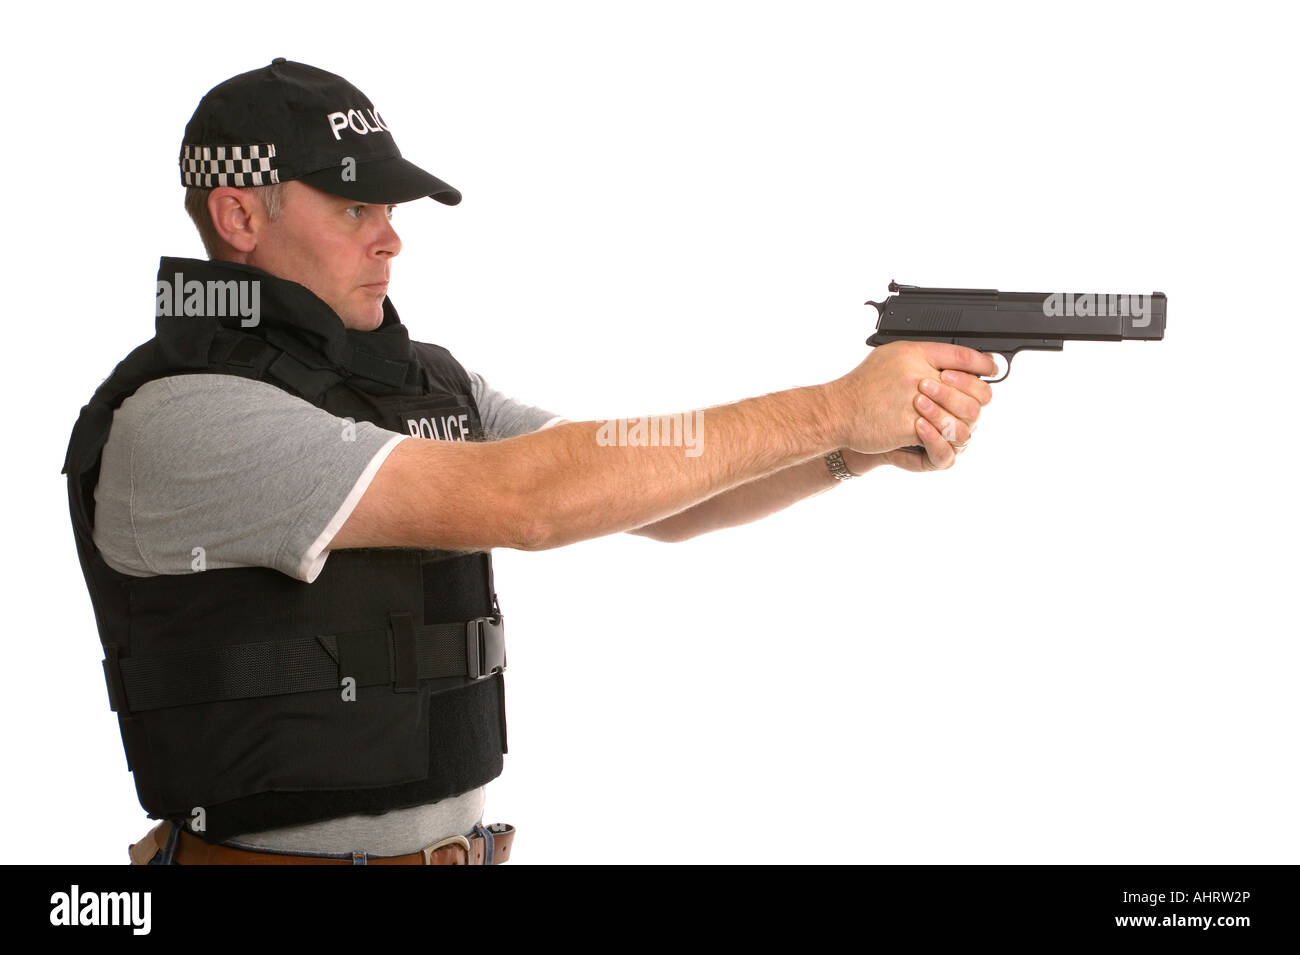 Undercover armed Police officer side profile Stock Photo